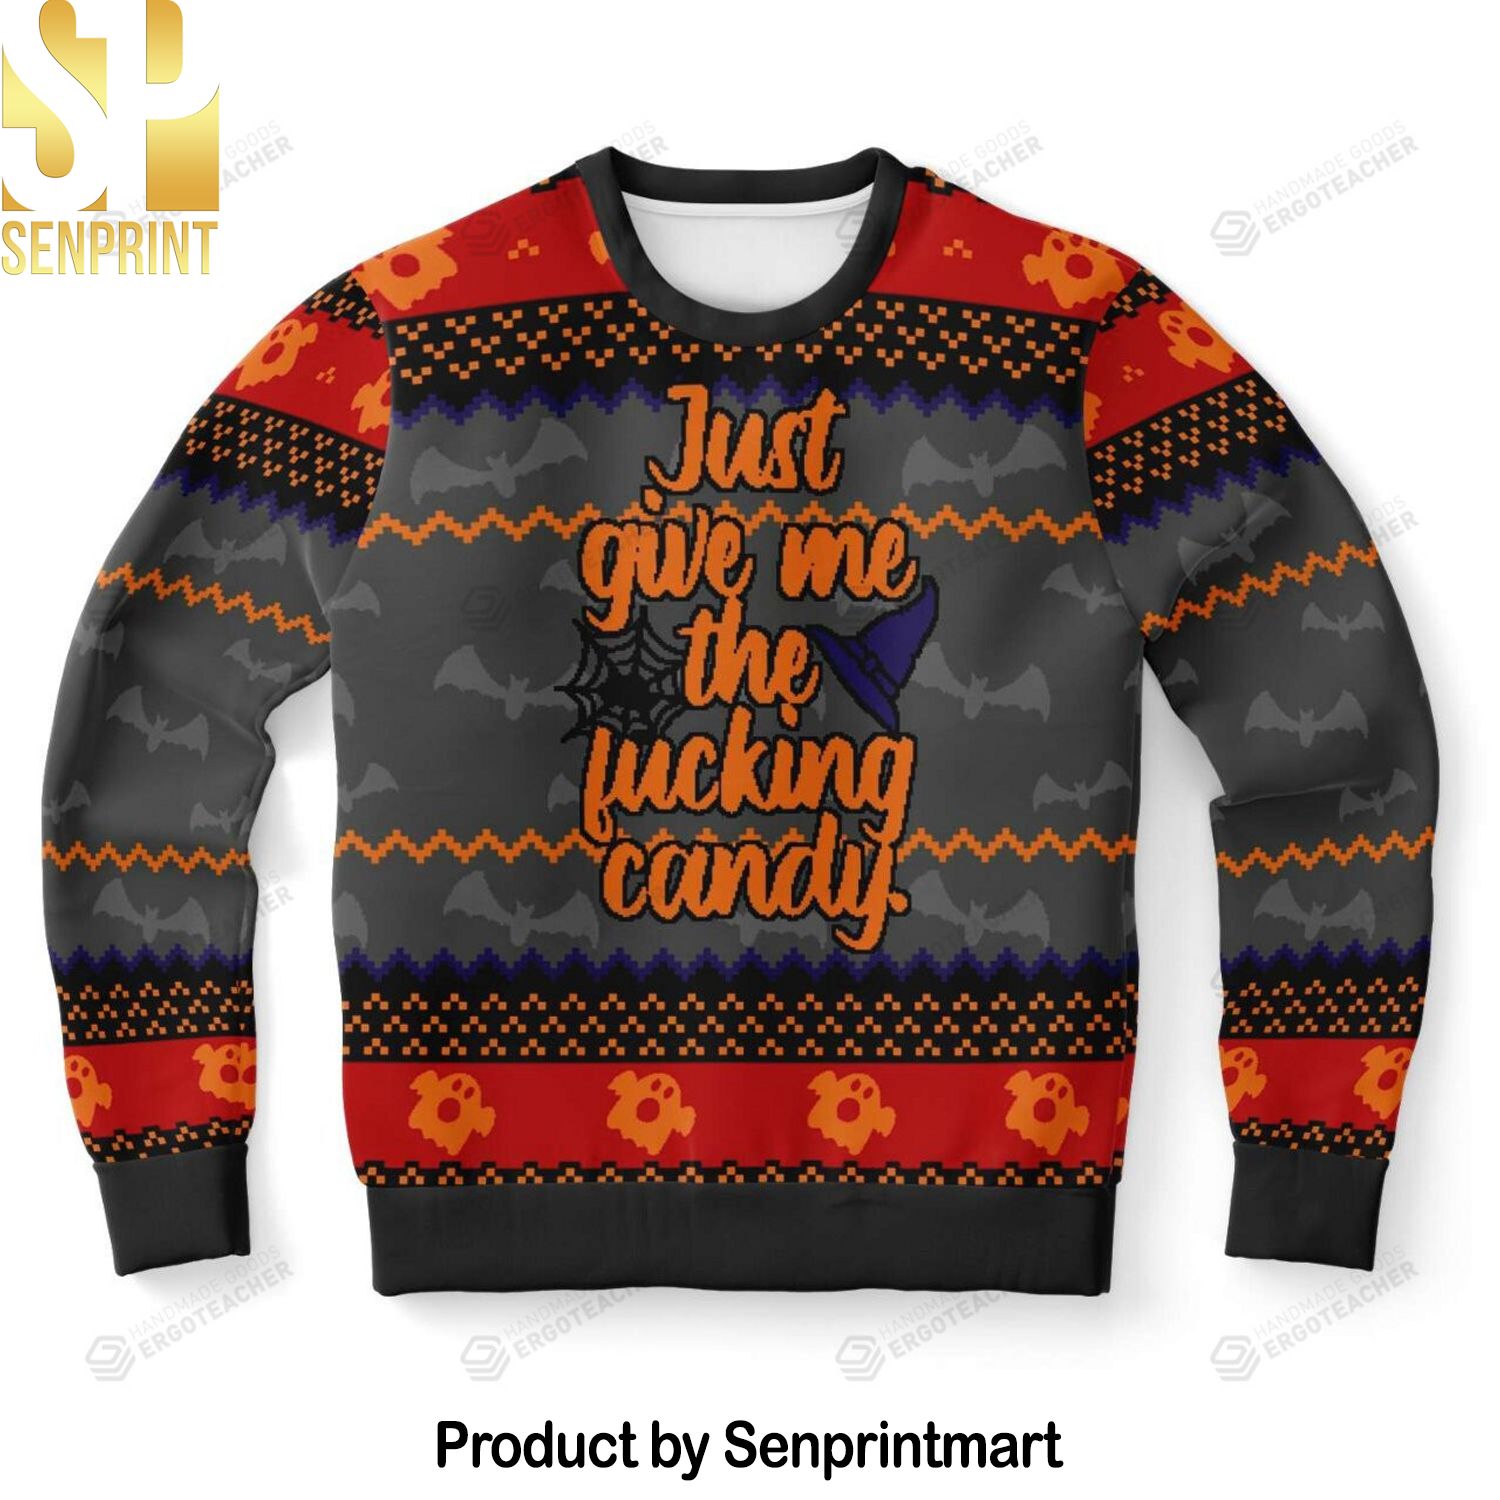 Give Me The F Candy Ugly Christmas Holiday Sweater